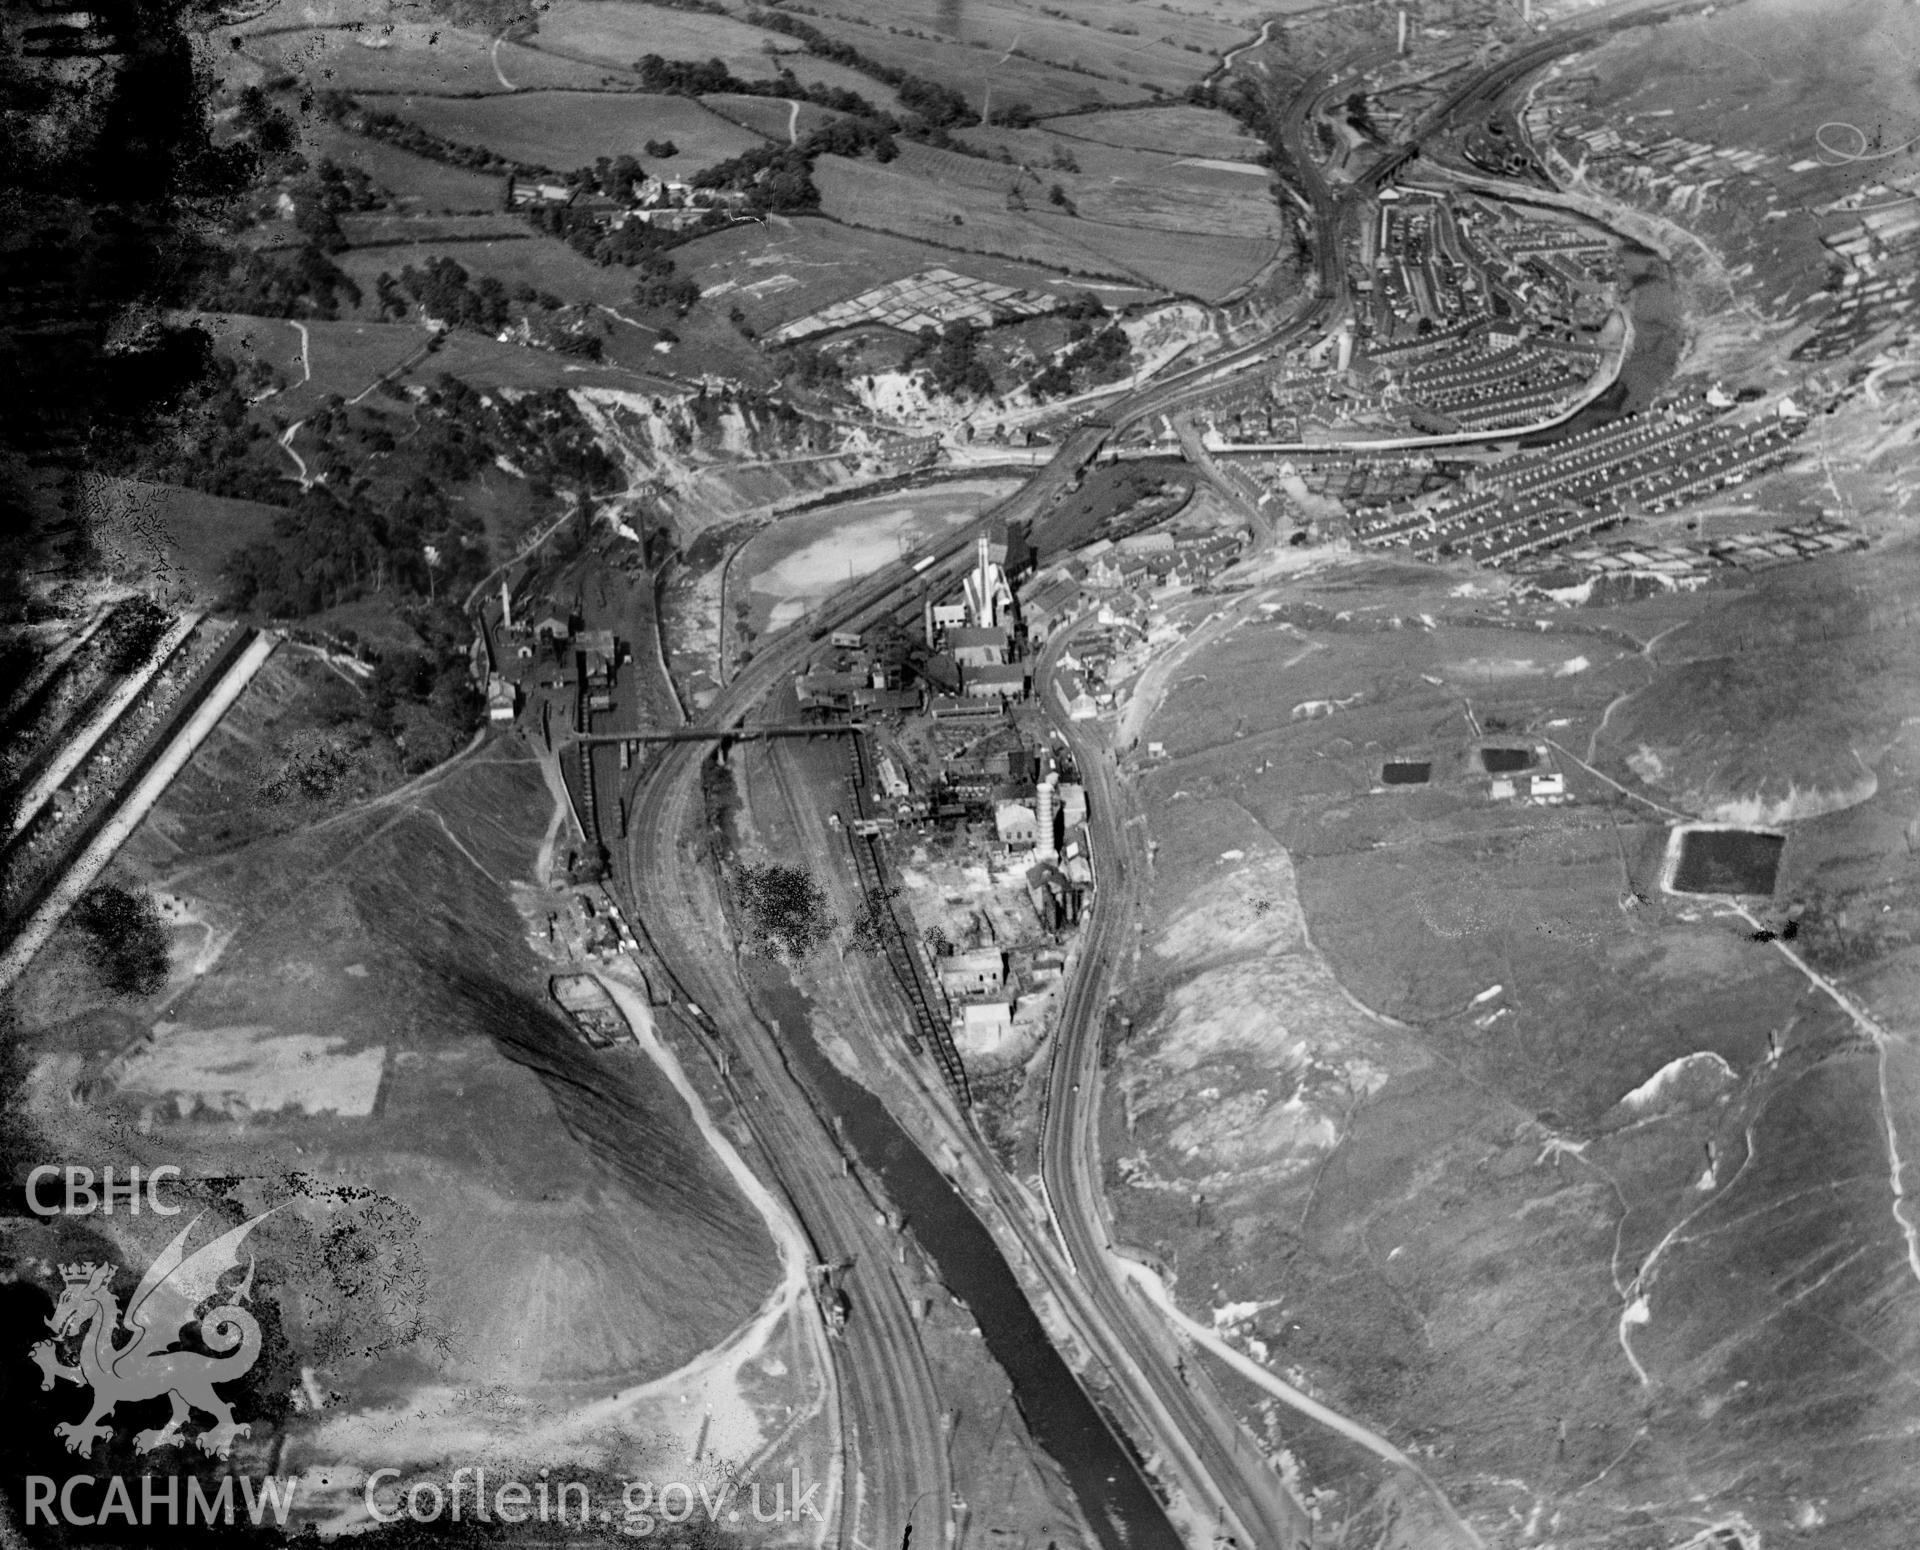 View of Lewis Merthyr Colliery, Hafod looking from west, oblique aerial view. 5?x4? black and white glass plate negative.